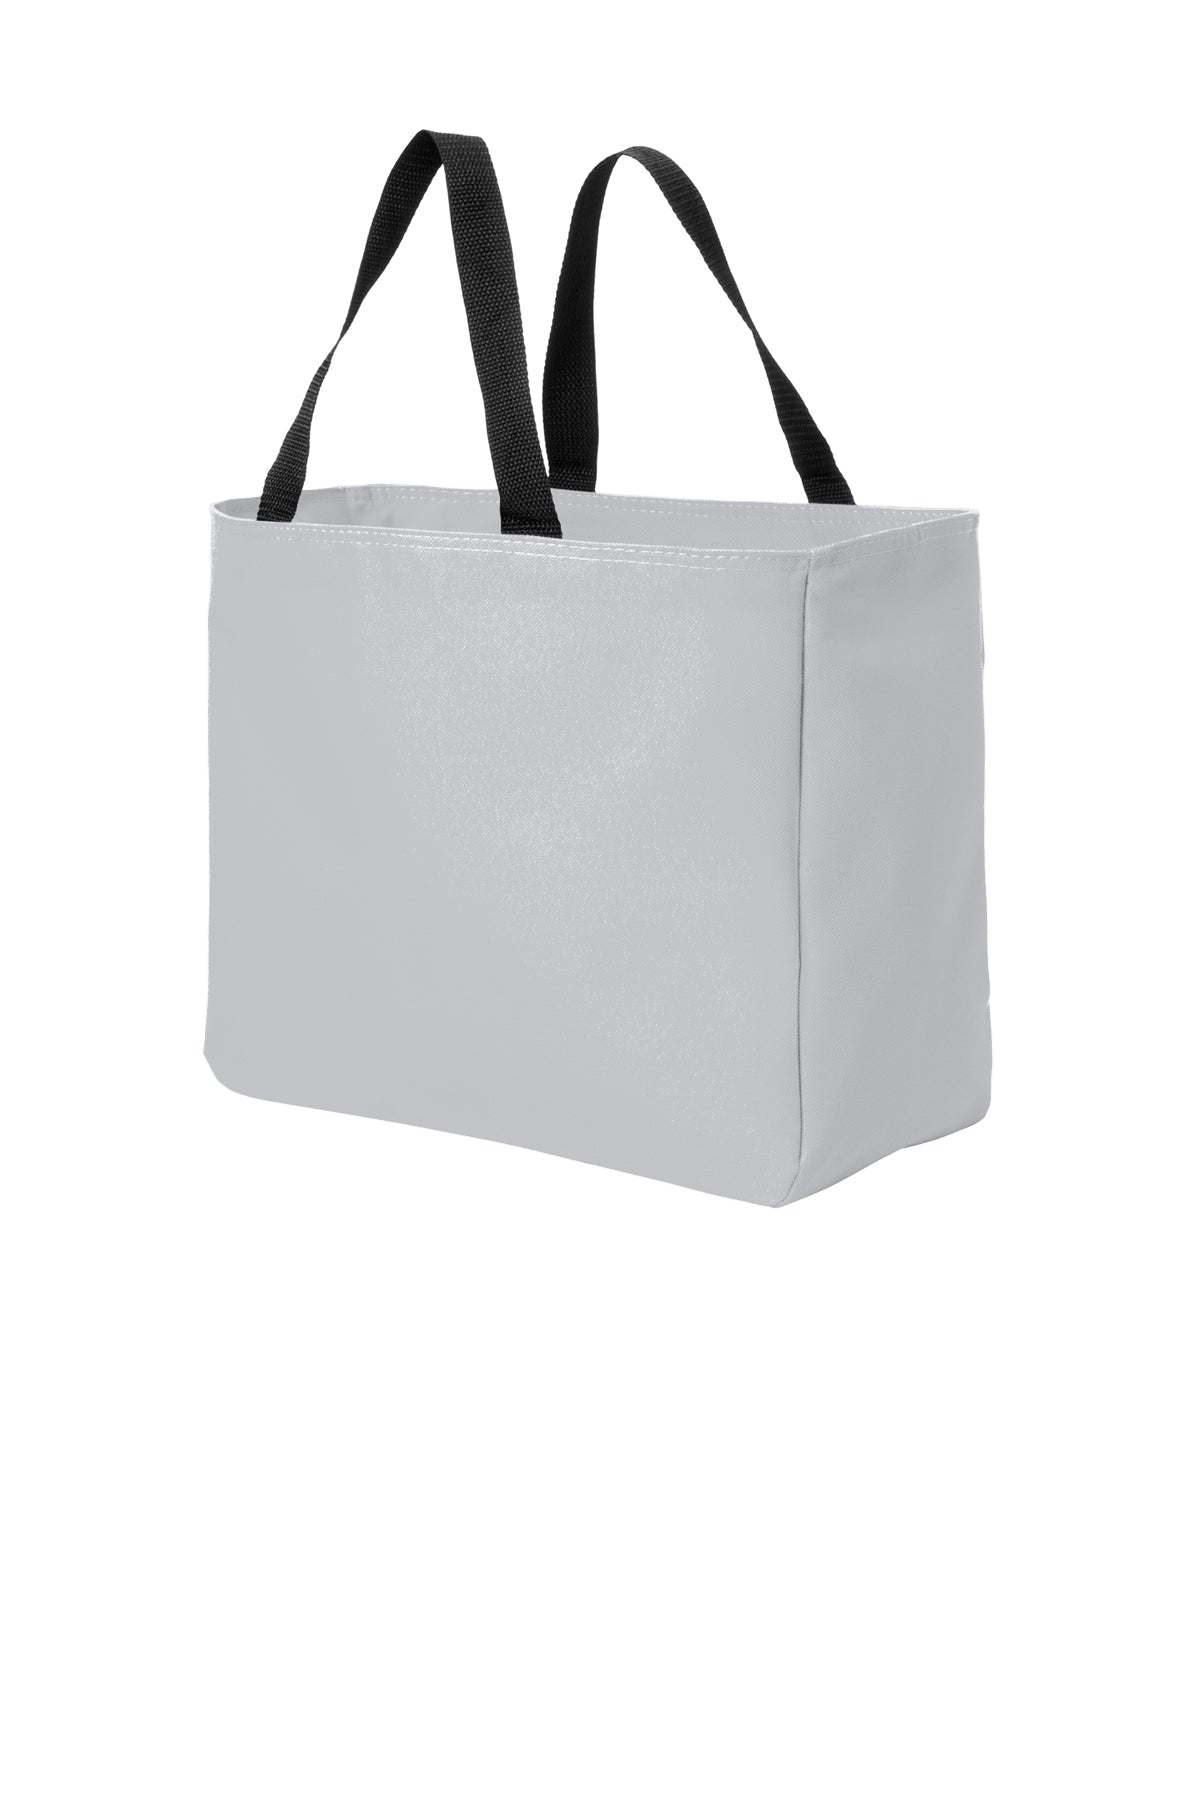 Port Authority - Essential Customized Tote, Chrome